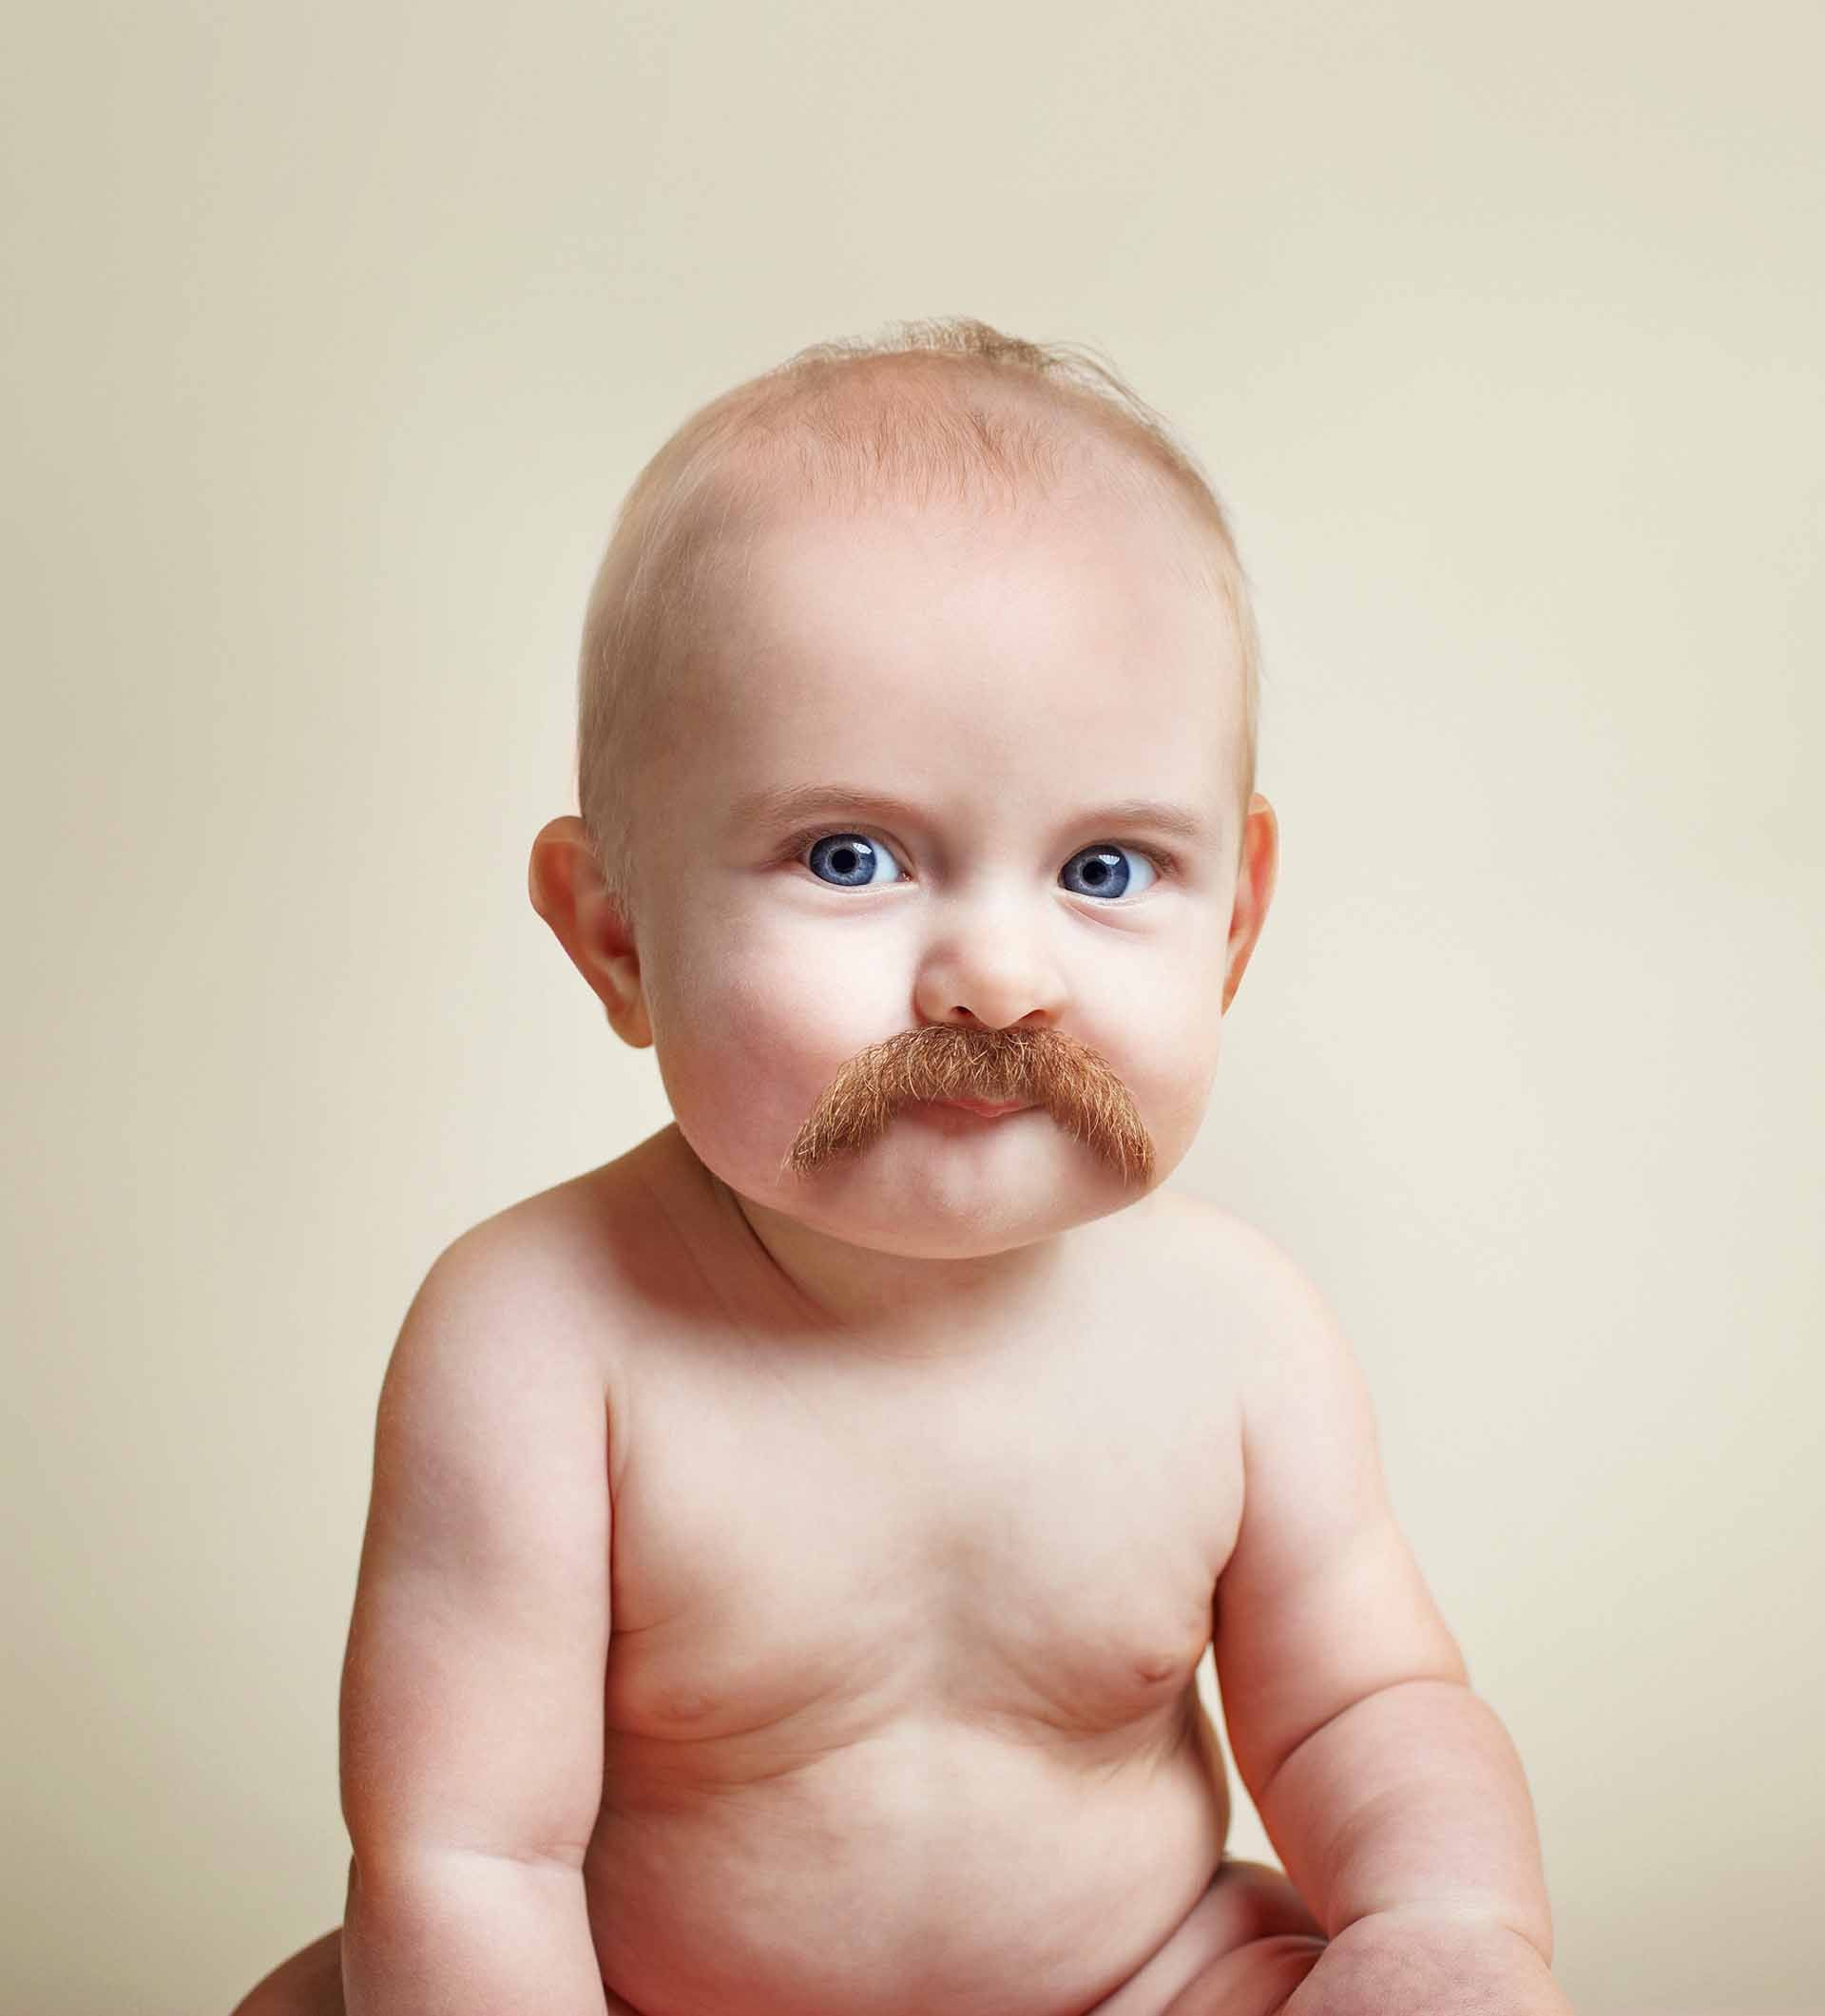 Baby Funny Pictures Wallpapers - Funny Baby Wallpaper Hd , HD Wallpaper & Backgrounds